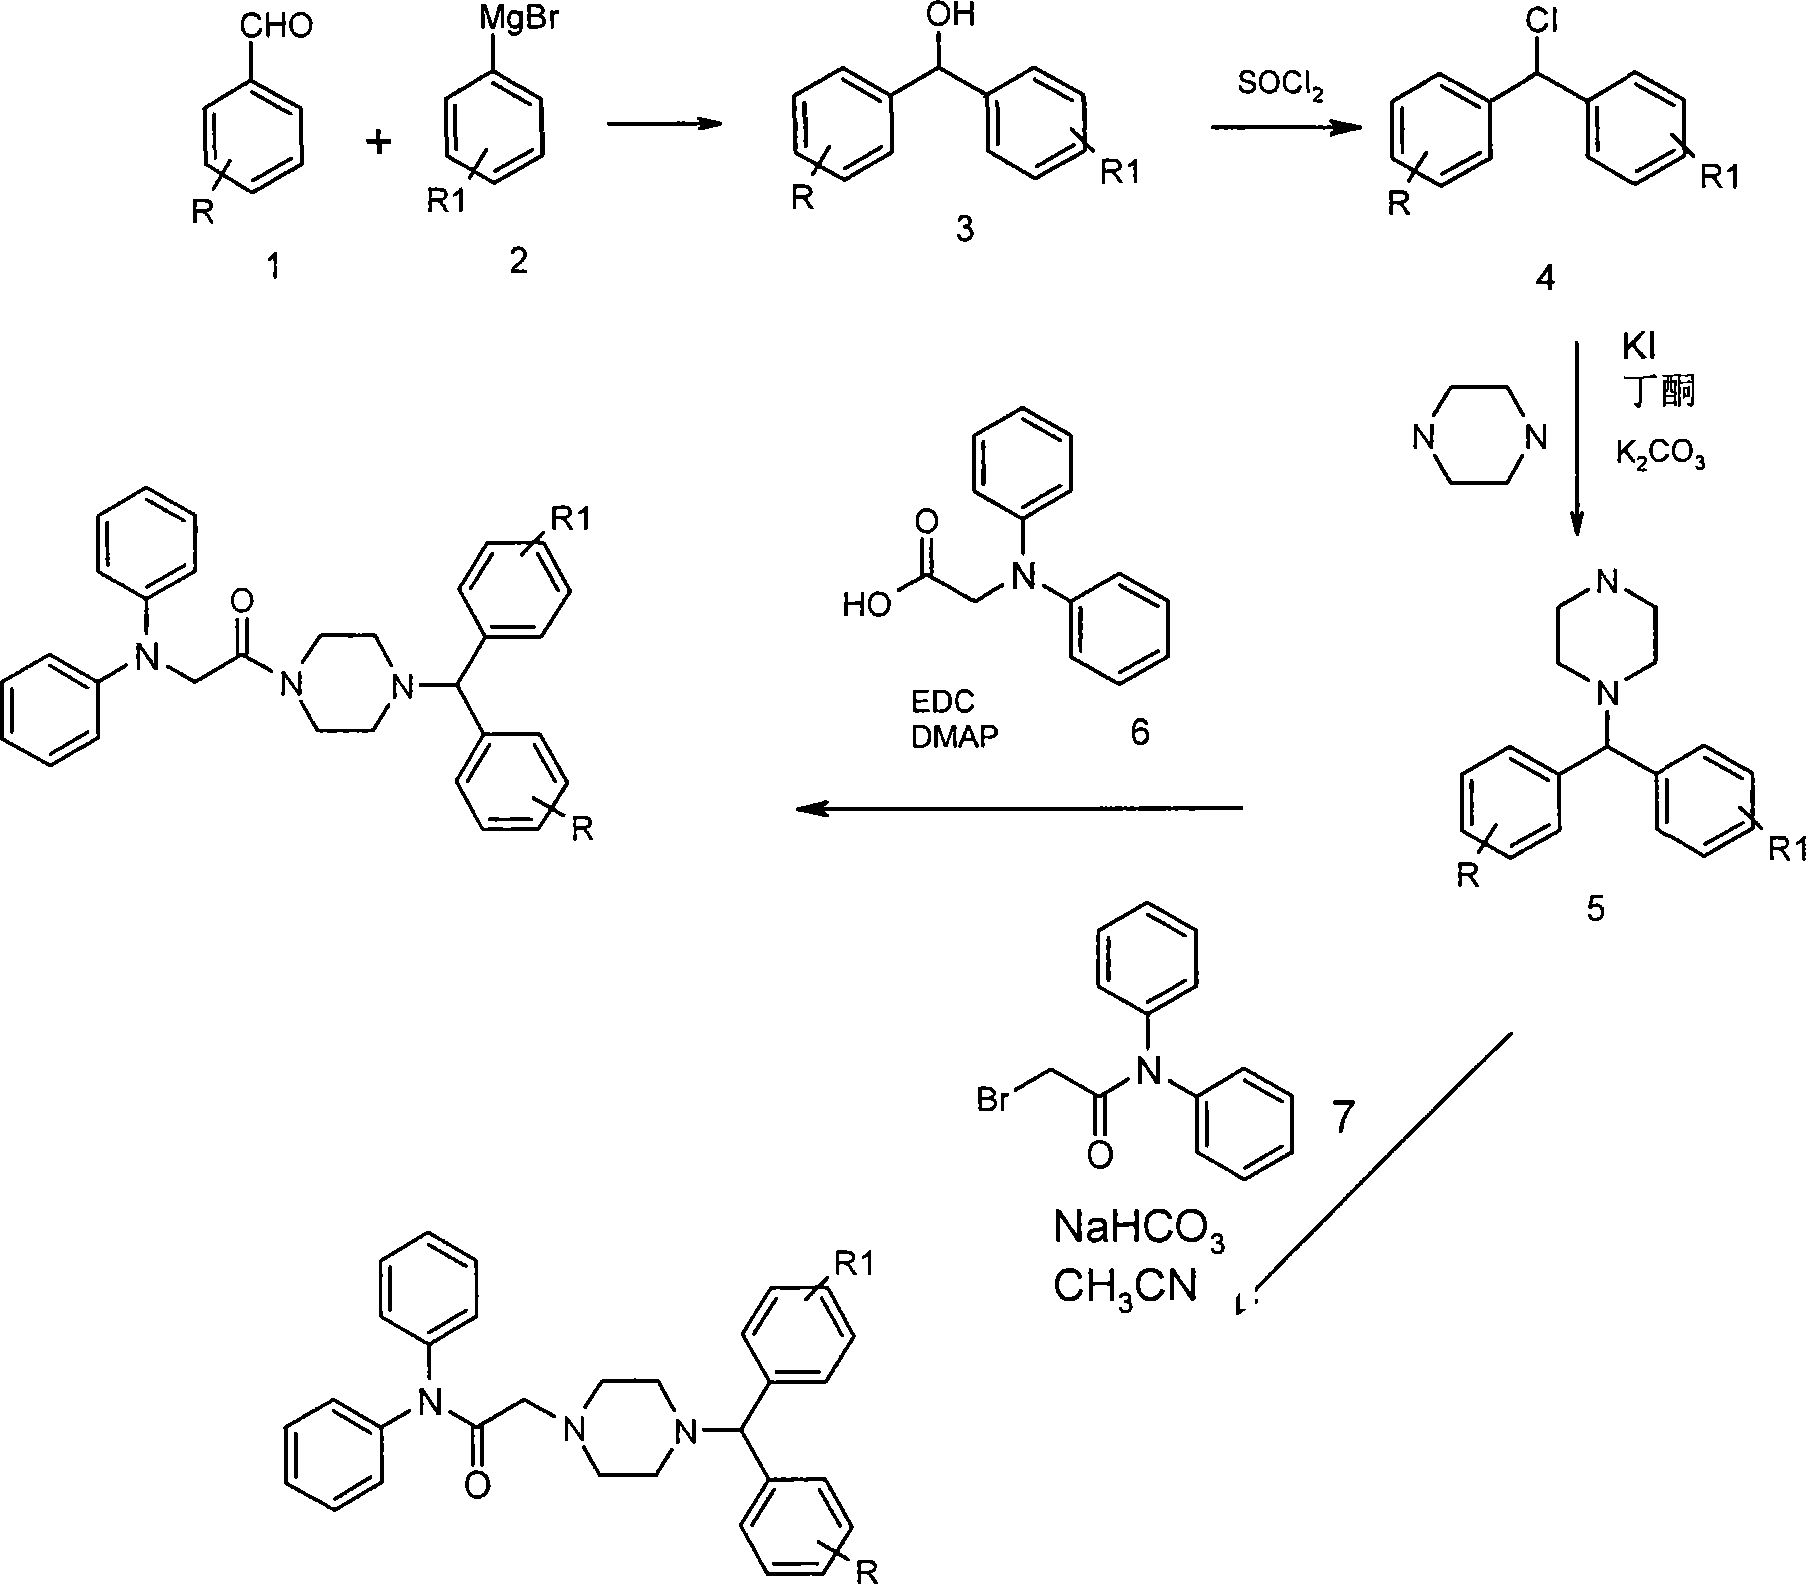 Diarylamine derivatives as calcium channel blockers